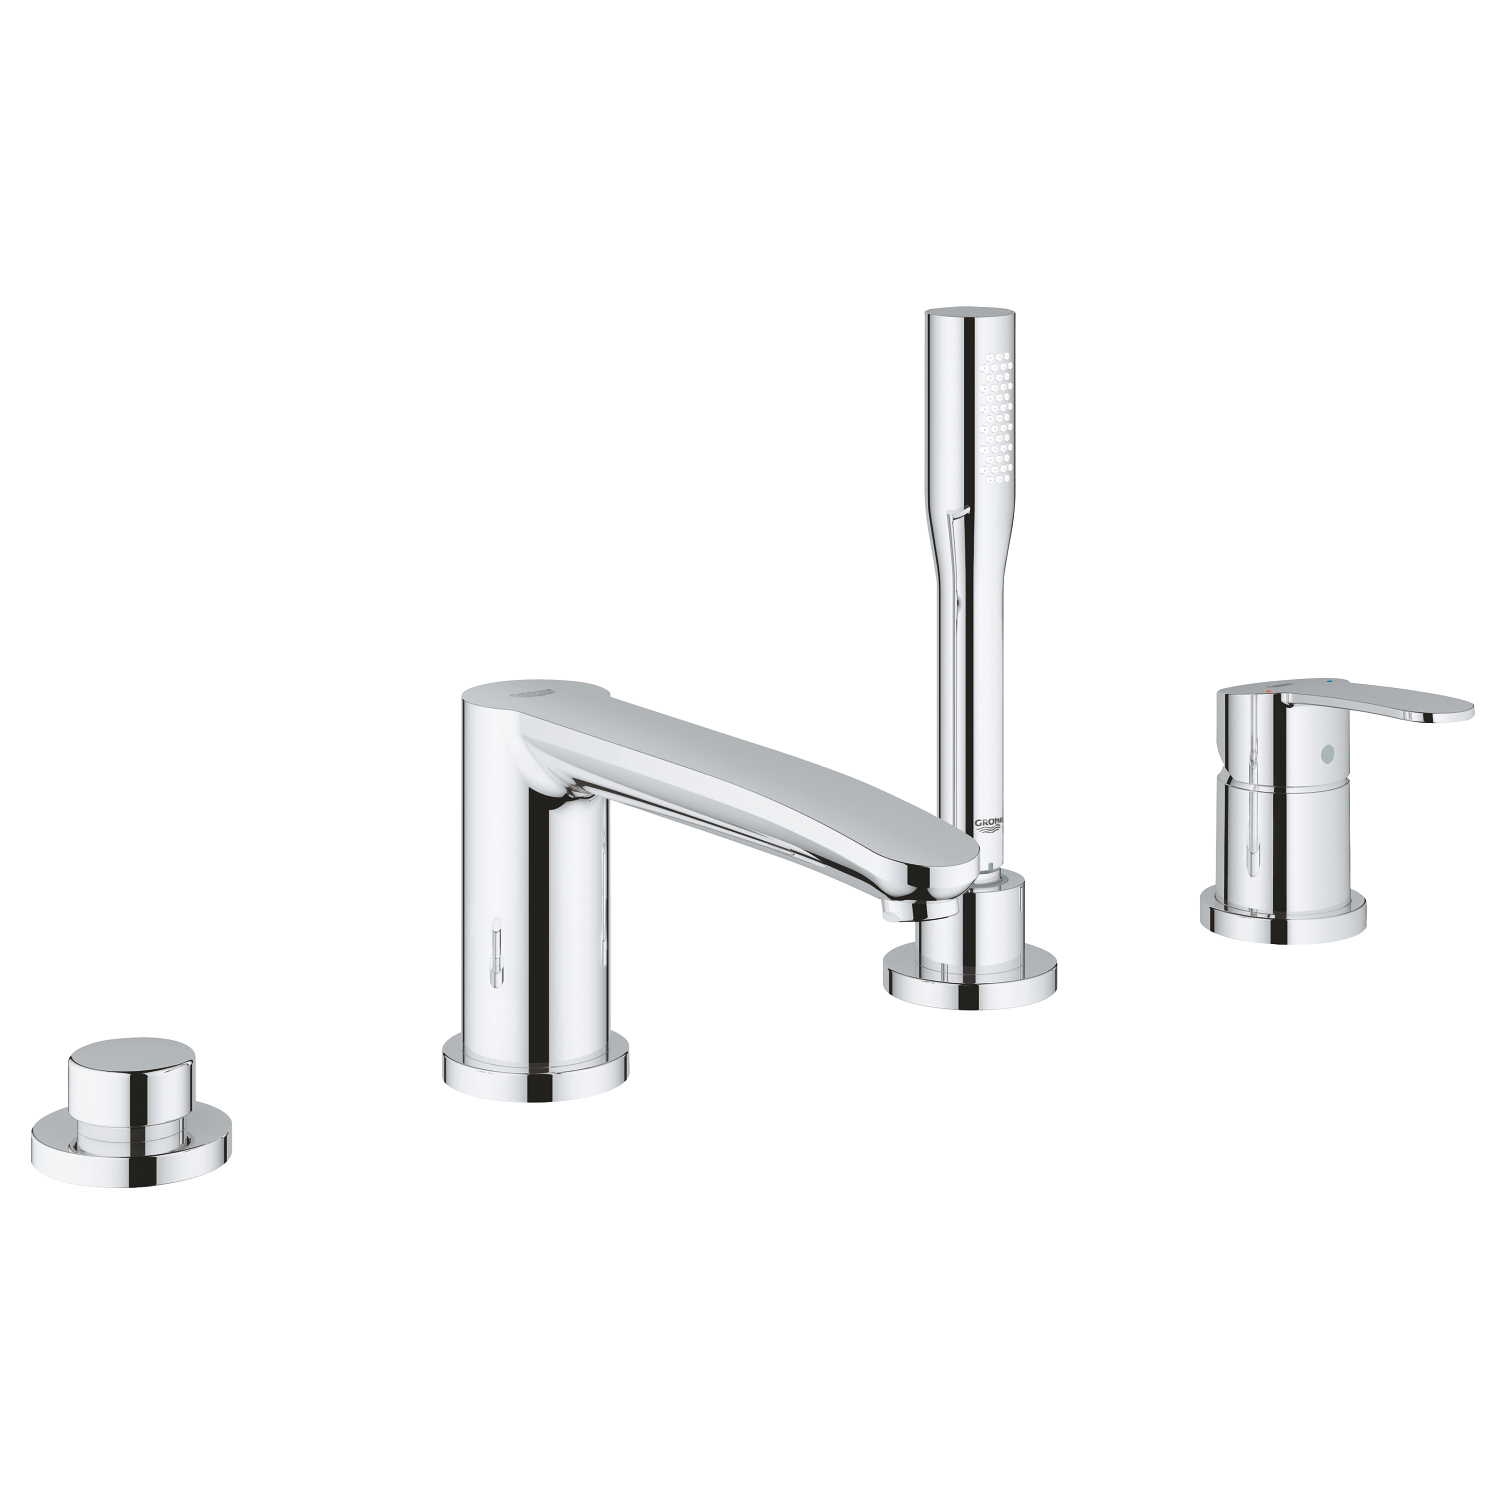 Eurostyle Cosmopolitan Deck Mounted Tub Faucet Plus Hand Shower In StarLight Chrome